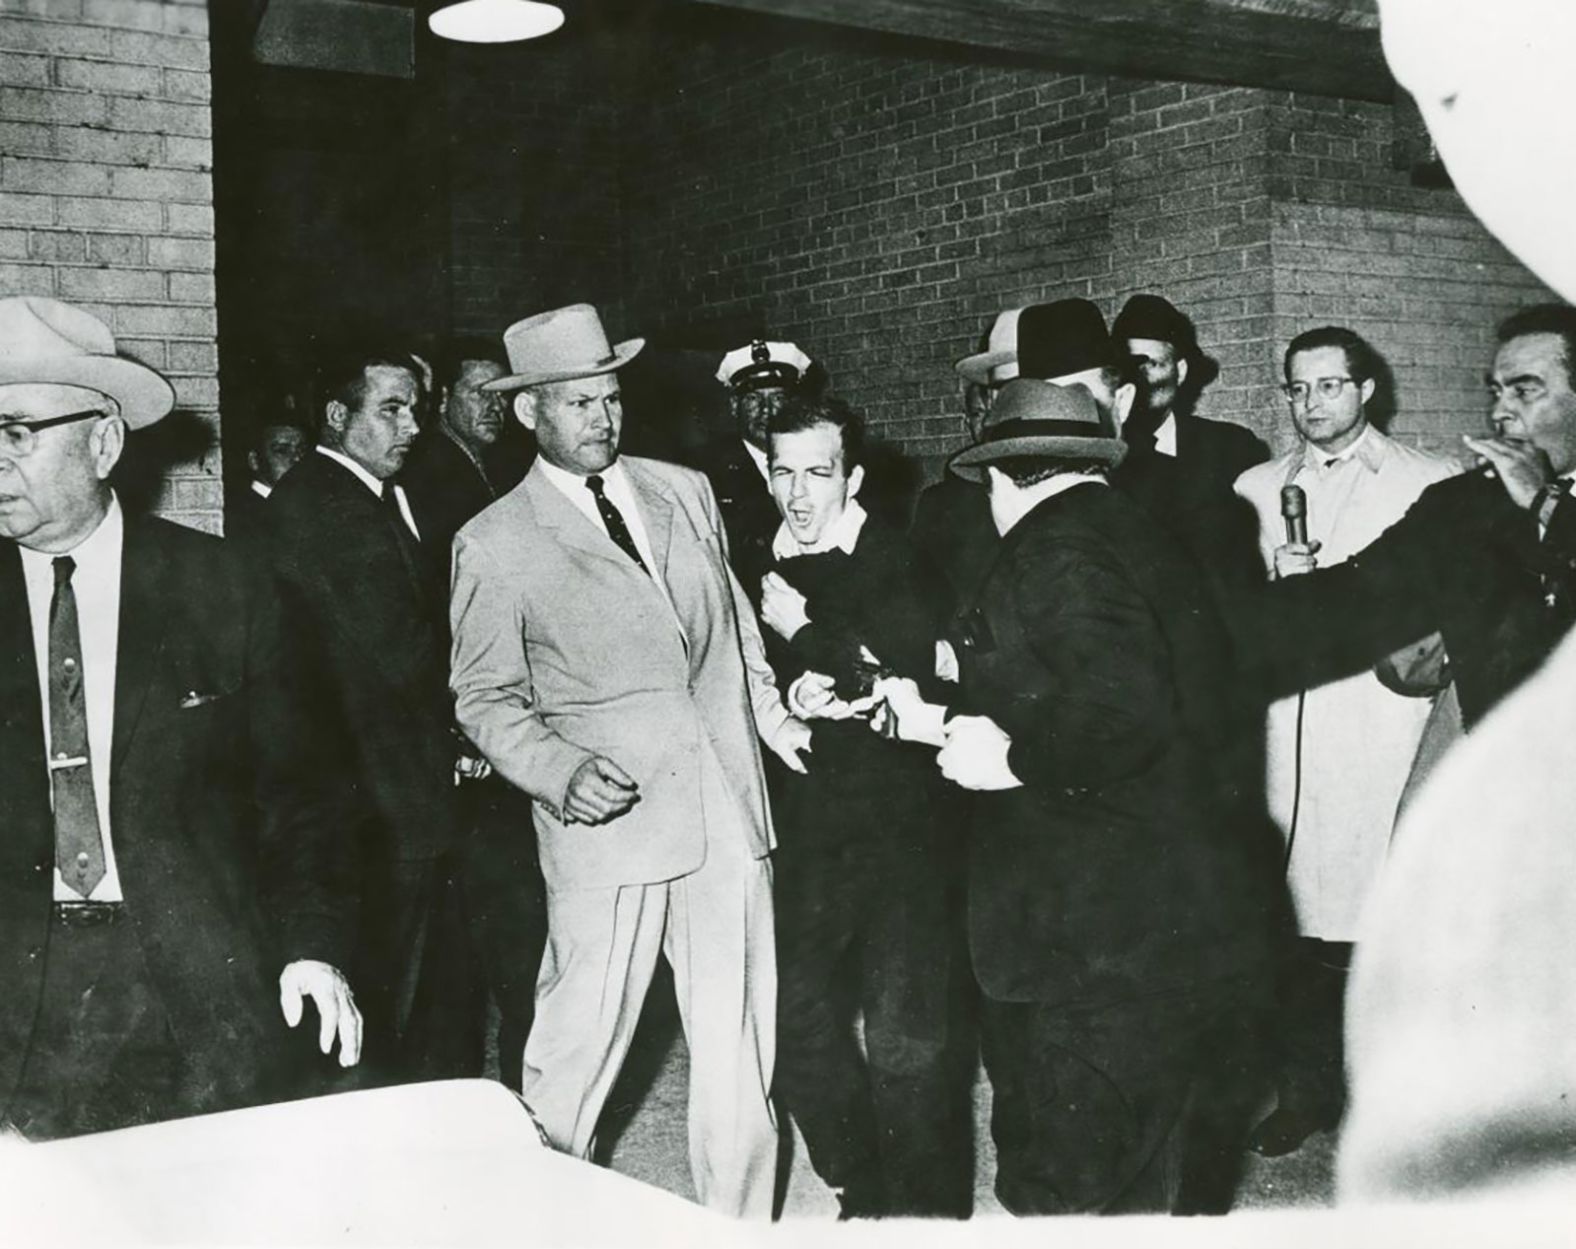 Lee Harvey Oswald reacts as Dallas night club owner Jack Ruby shoots at him in a corridor of the Dallas police headquarters.